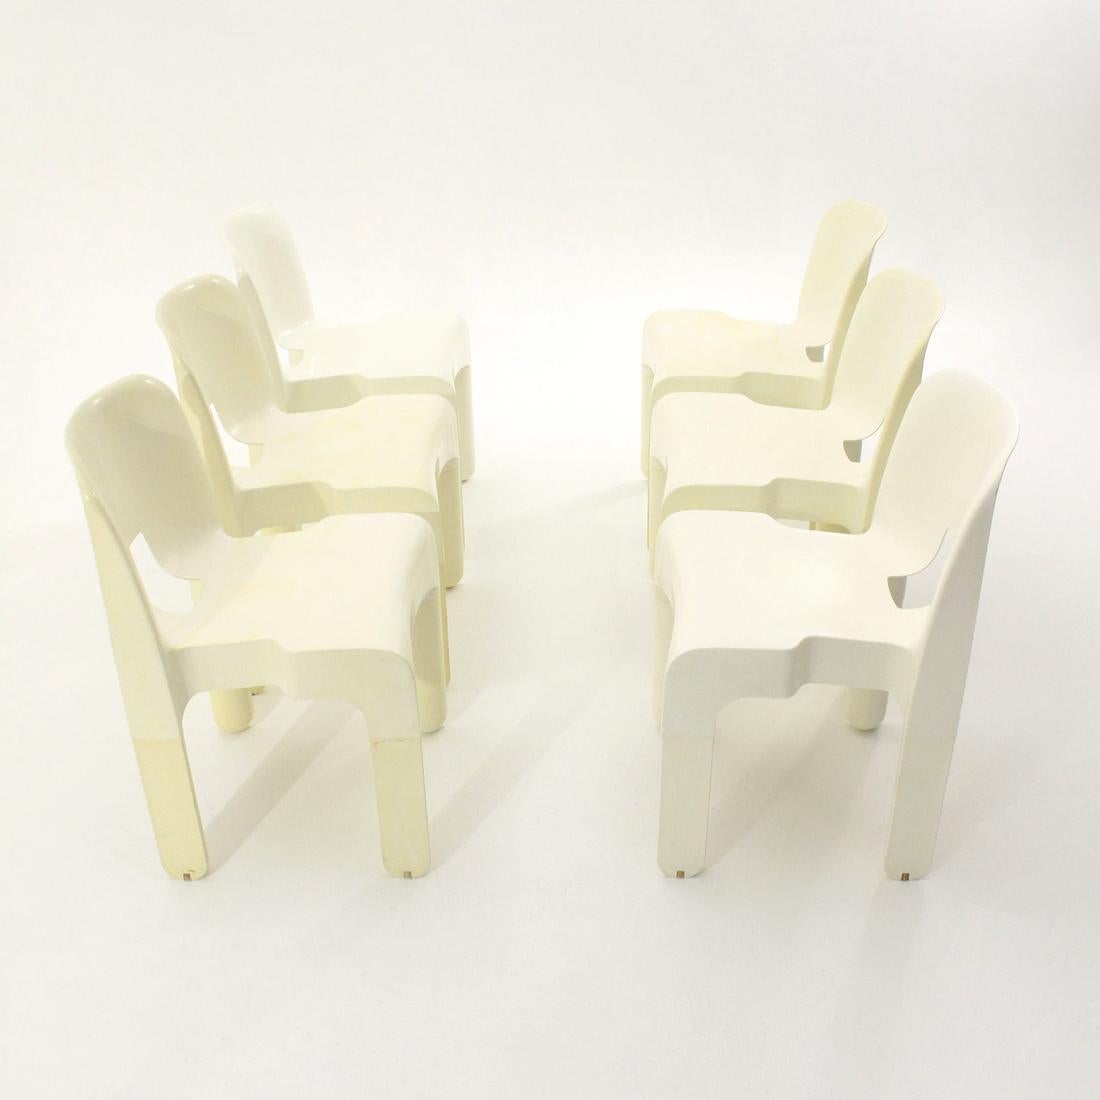 Mid-20th Century 6 “4860” Chairs in White Plastic by Joe Colombo for Kartell, 1960s